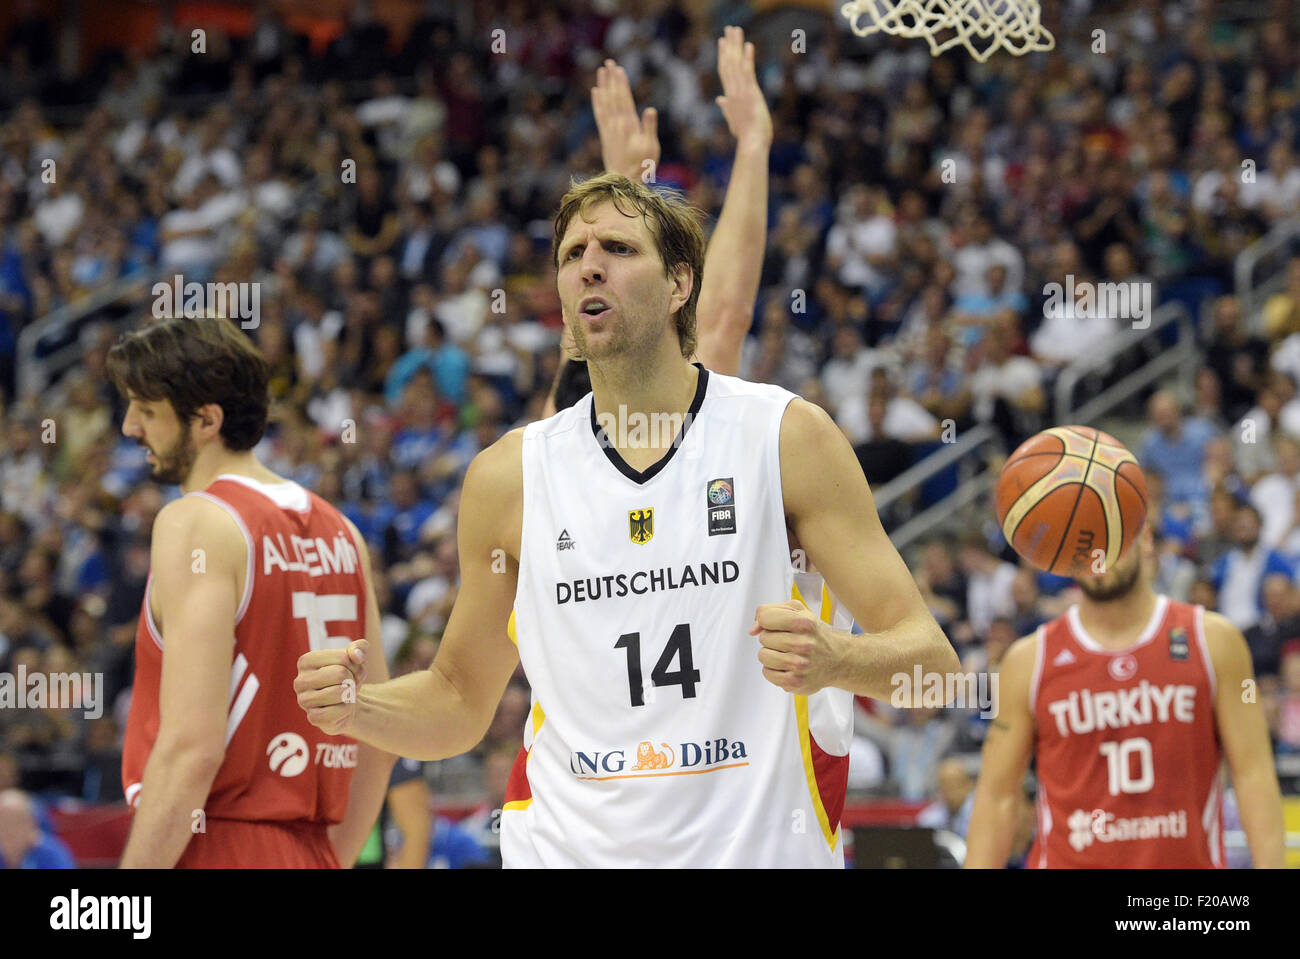 Berlin, Germany. 8th Sep, 2015. Germany's Dirk Nowitzki reacts during the the FIBA EuroBasket 2015 Group B match Germany vs Turkey in Berlin, Germany, 8 September 2015. Germany lost 75:80. Photo: Rainer Jensen/dpa/Alamy Live News Stock Photo